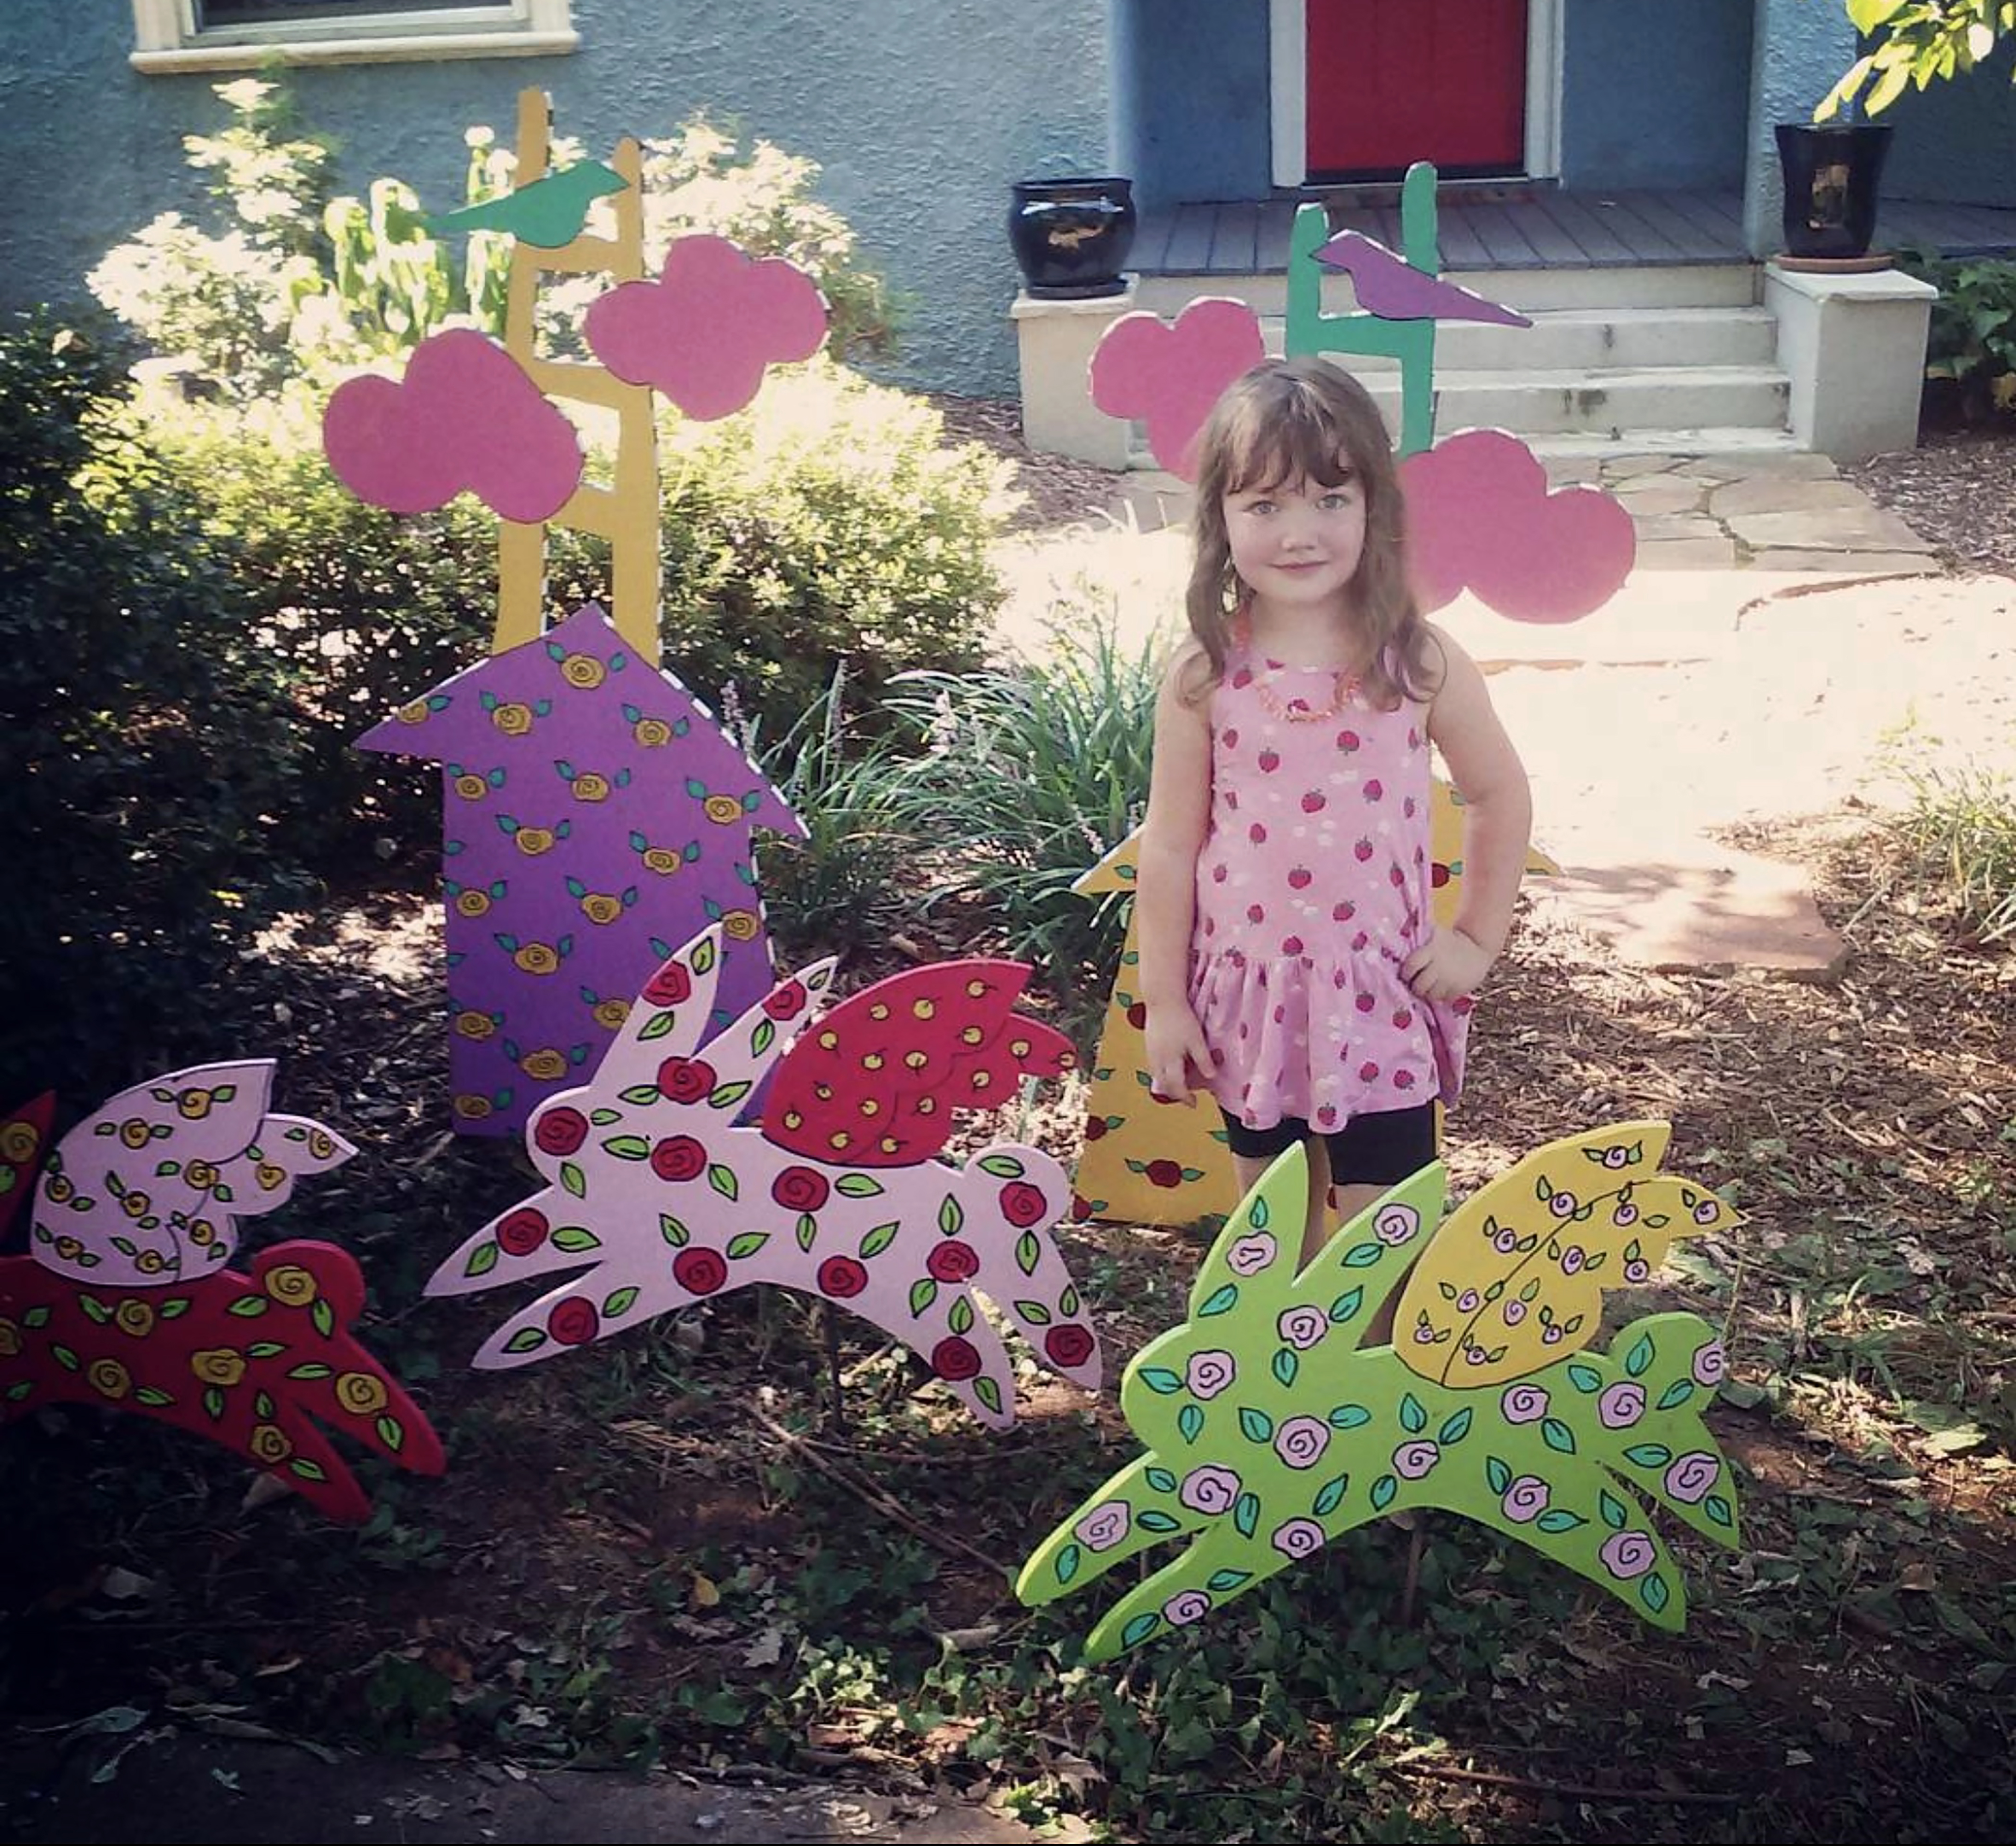 Margot, a young girl, stands among a collection of painted rabbit cut outs. Margot's dress matches the pattern painted on the rabbits.